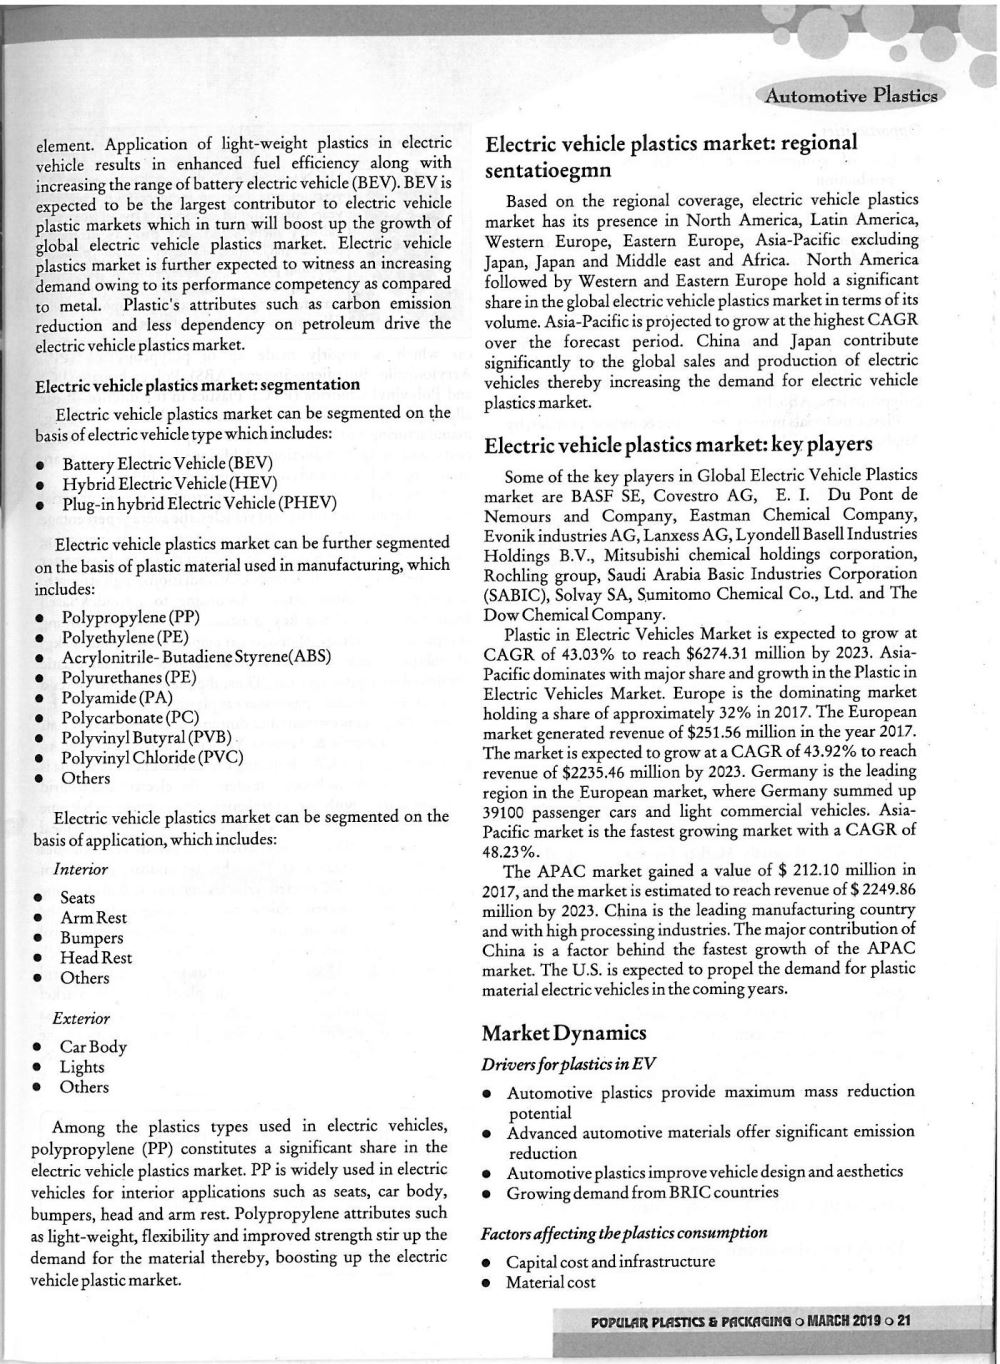 Plastics in electric vehicles page 2